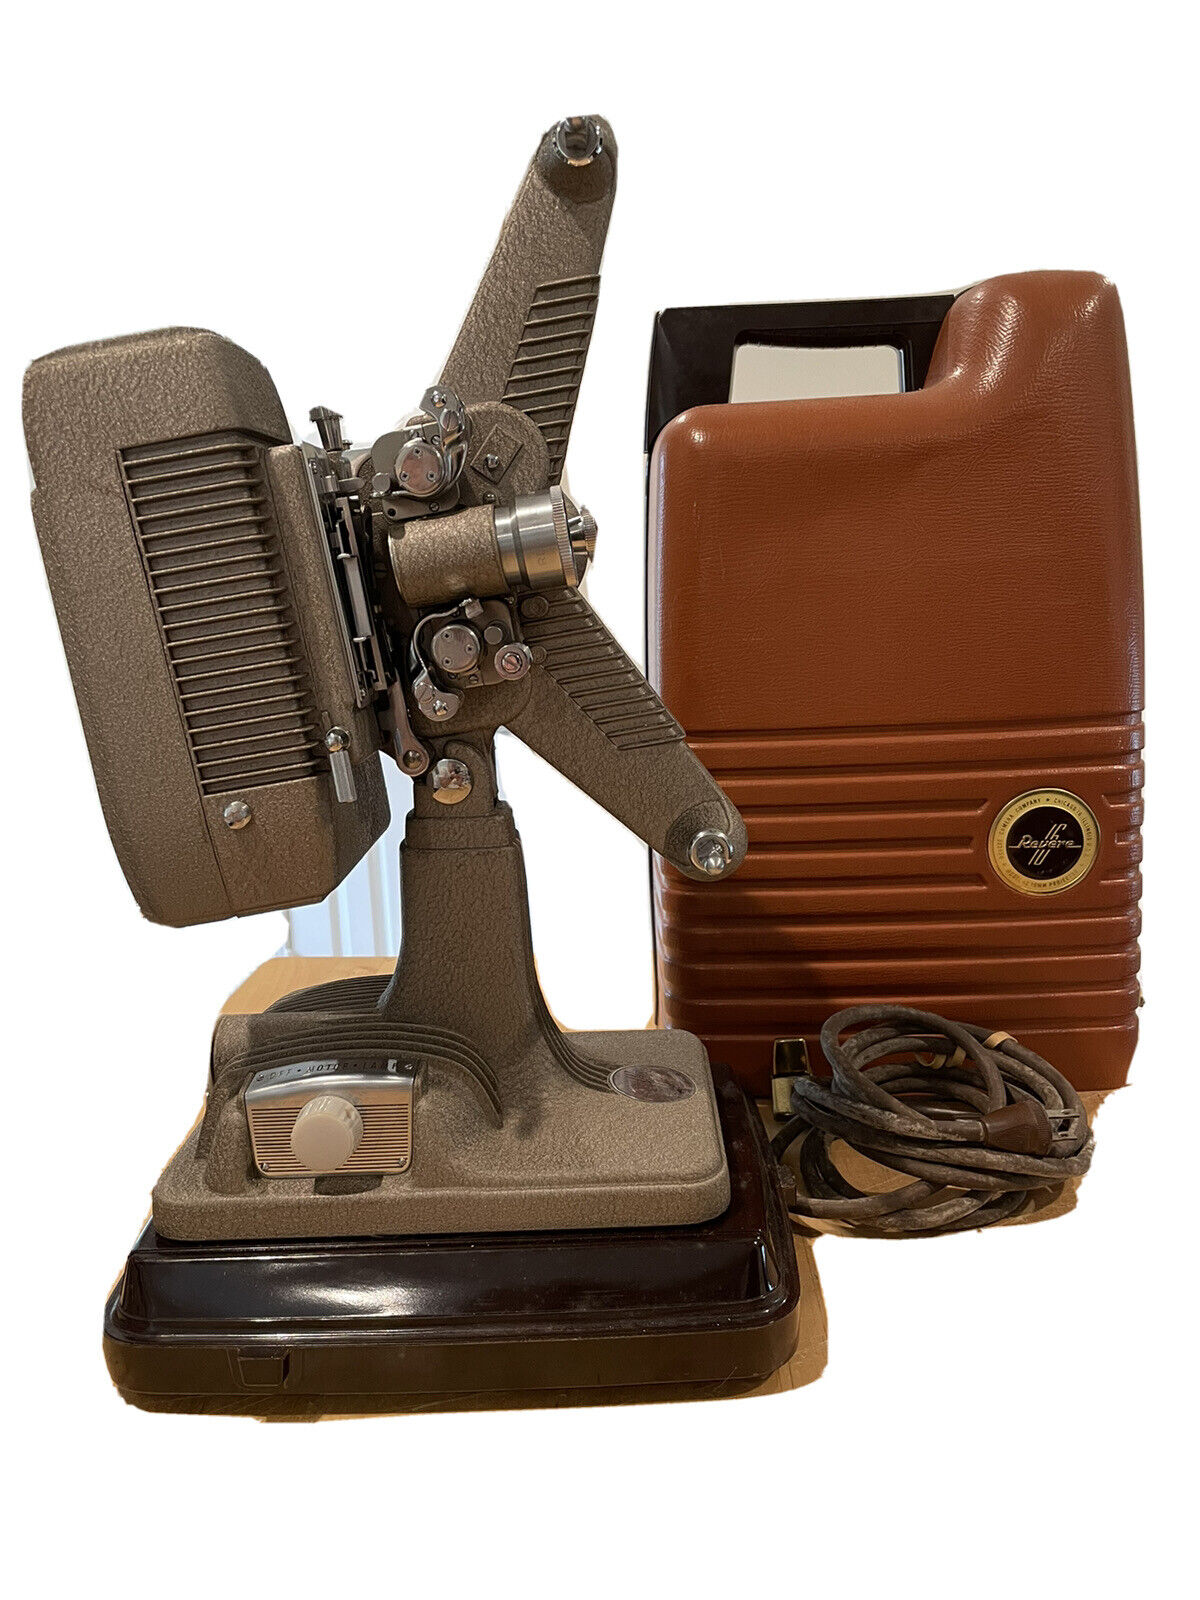 Vintage Revere Model 48 16mm Film Projector With Case Reel Cord .